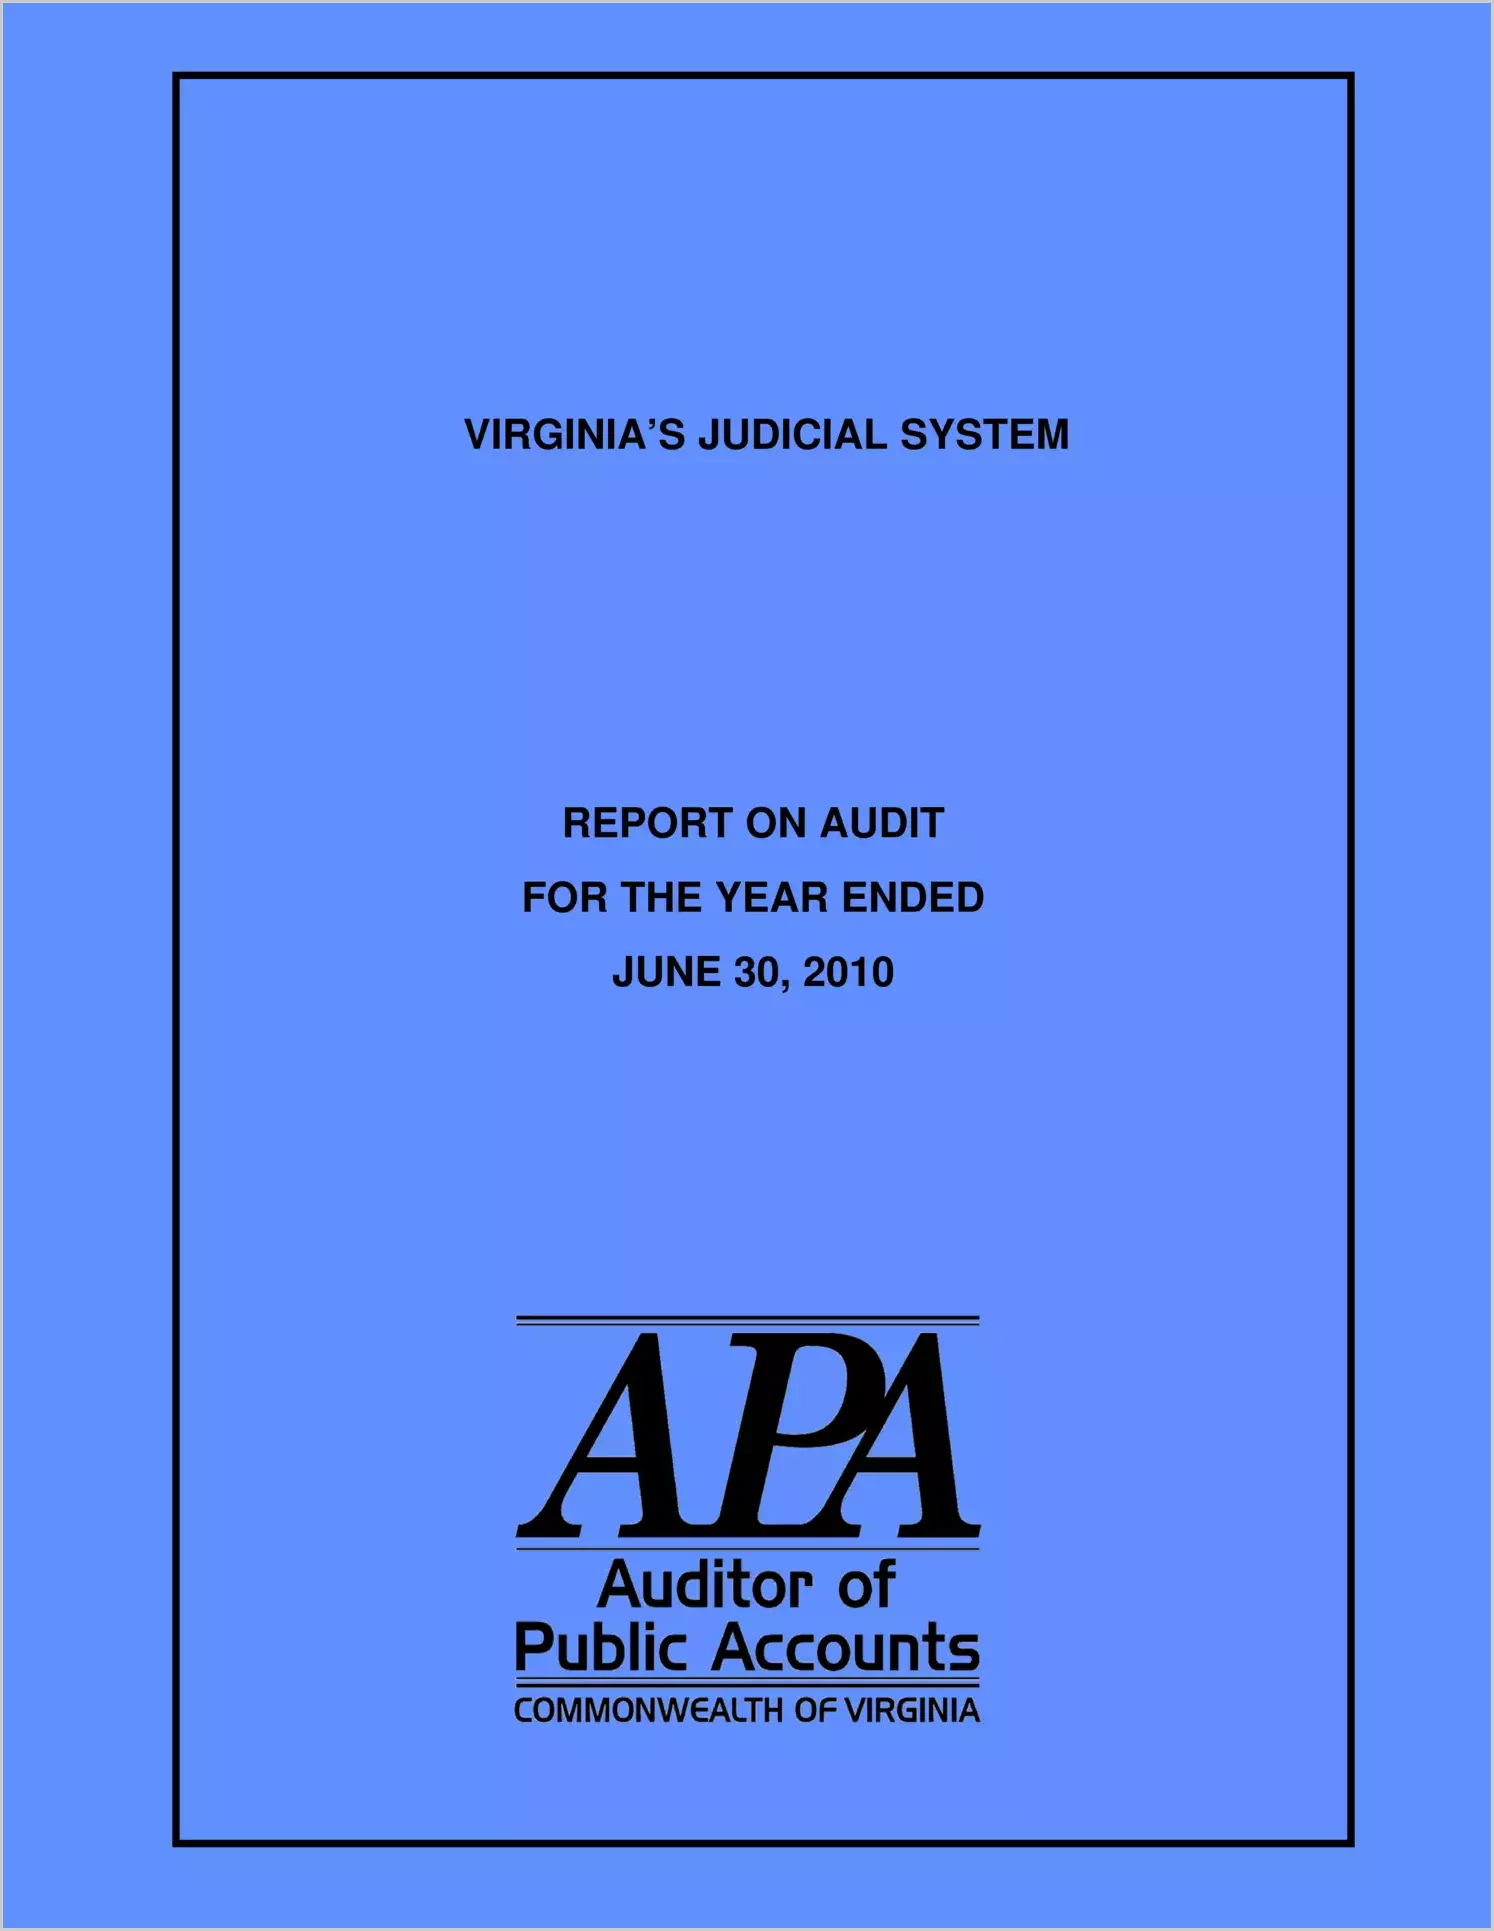 Virginia's Judicial System for the year ended June 30, 2010